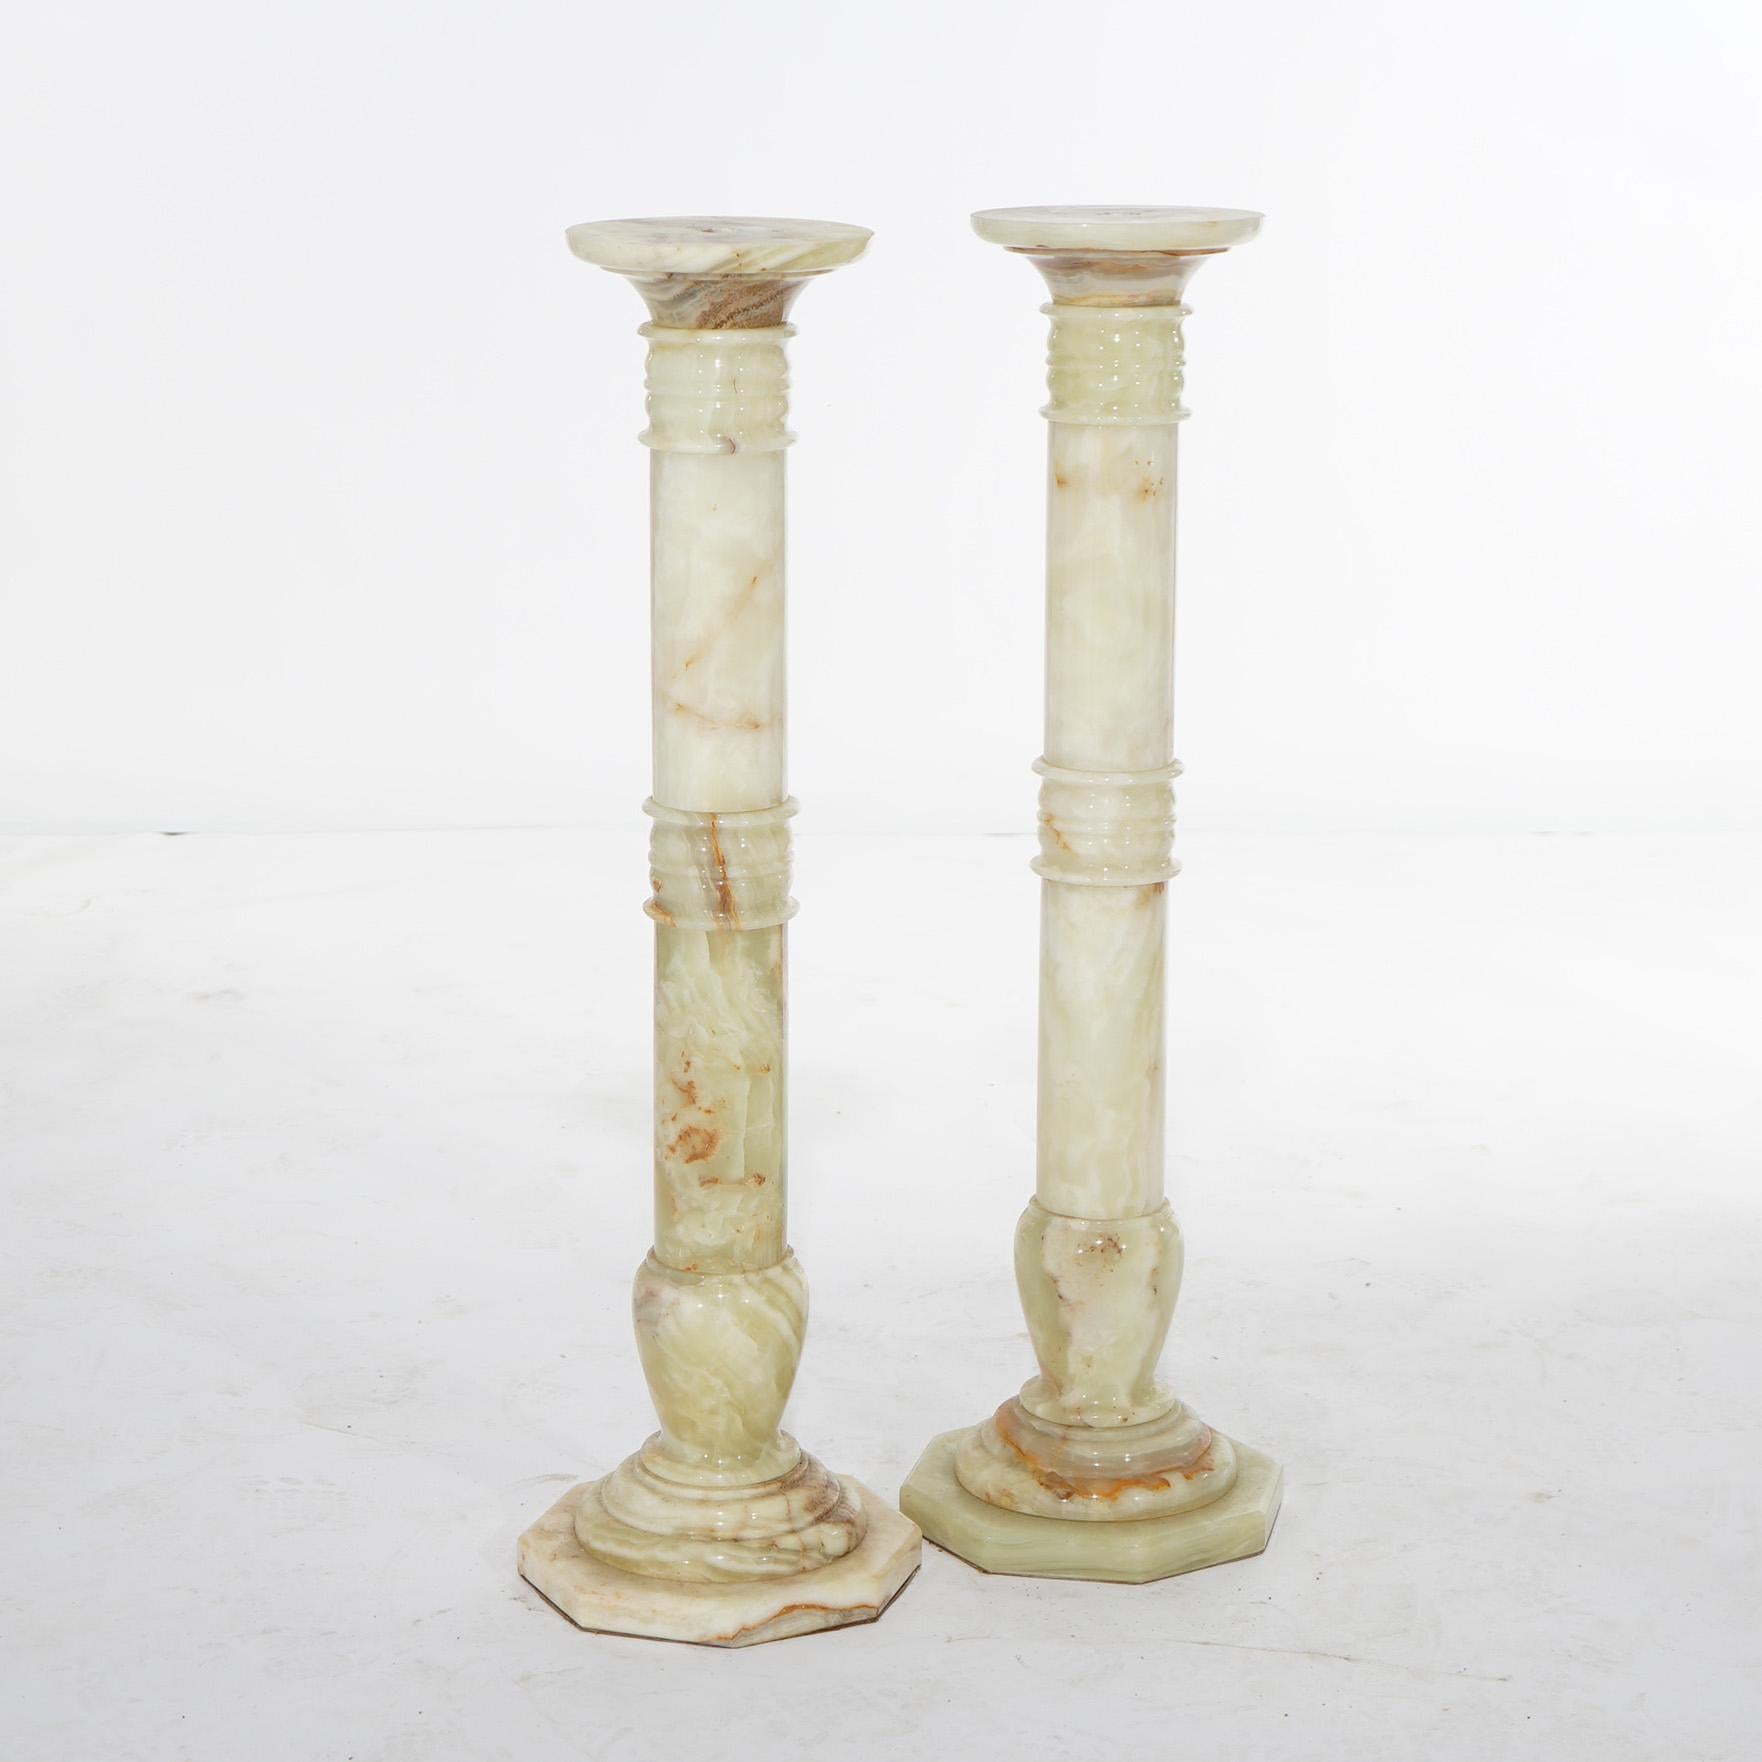 Antique Pair of Classical Carved Onyx Sculpture Display Pedestals Early 20th C For Sale 1